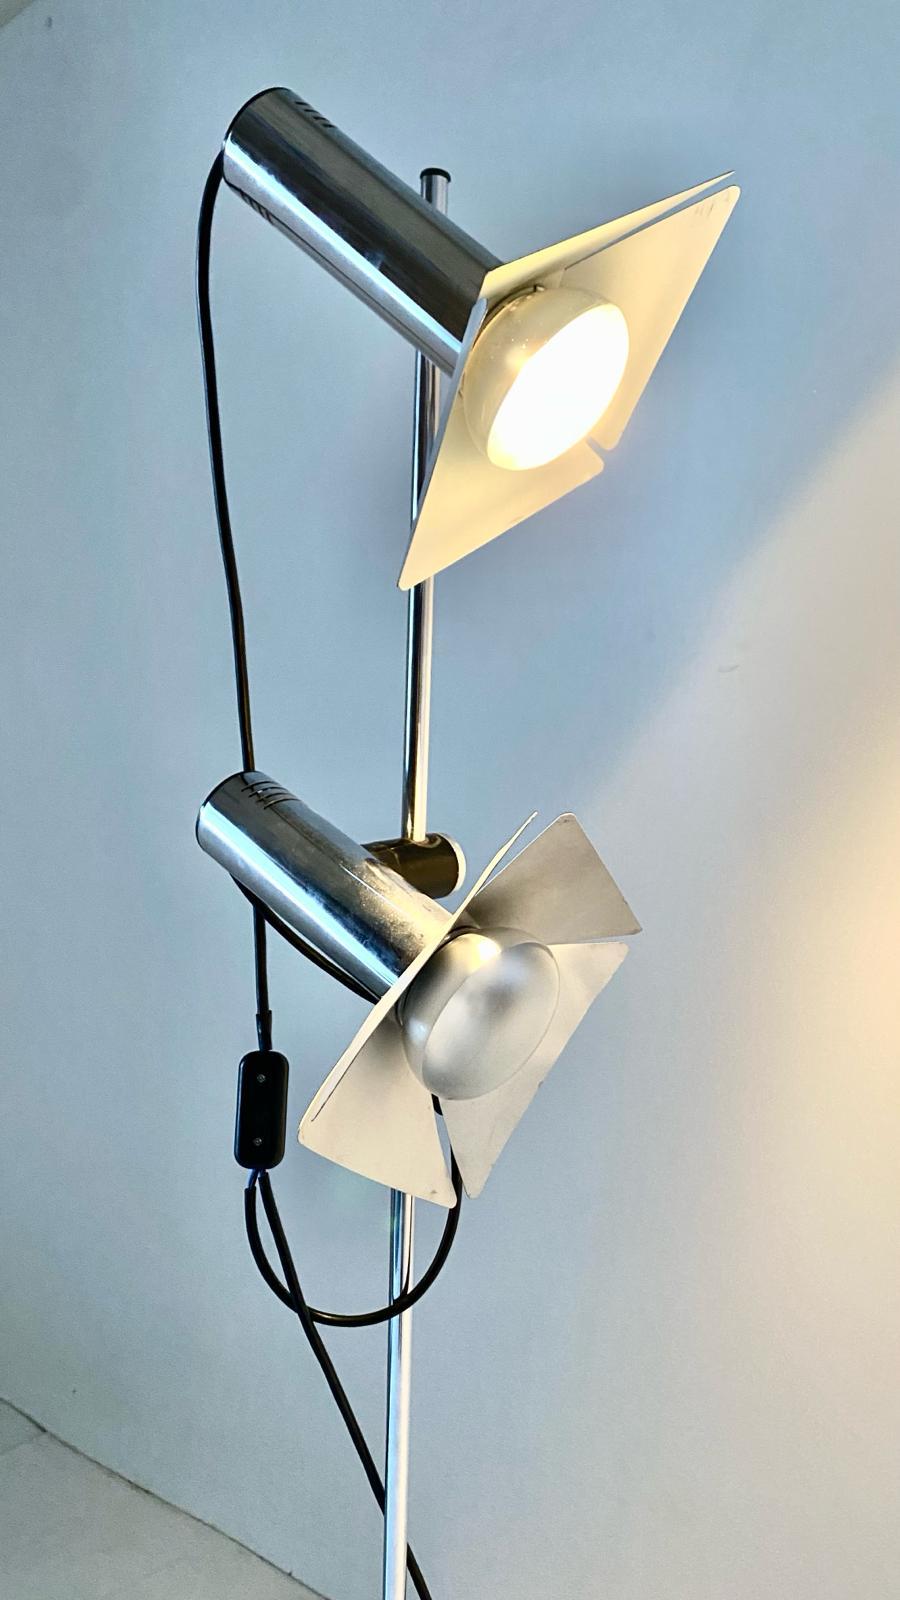 Space Age Chromed Floor Lamp with Adjustable Lights, Italy 1970s For Sale 6